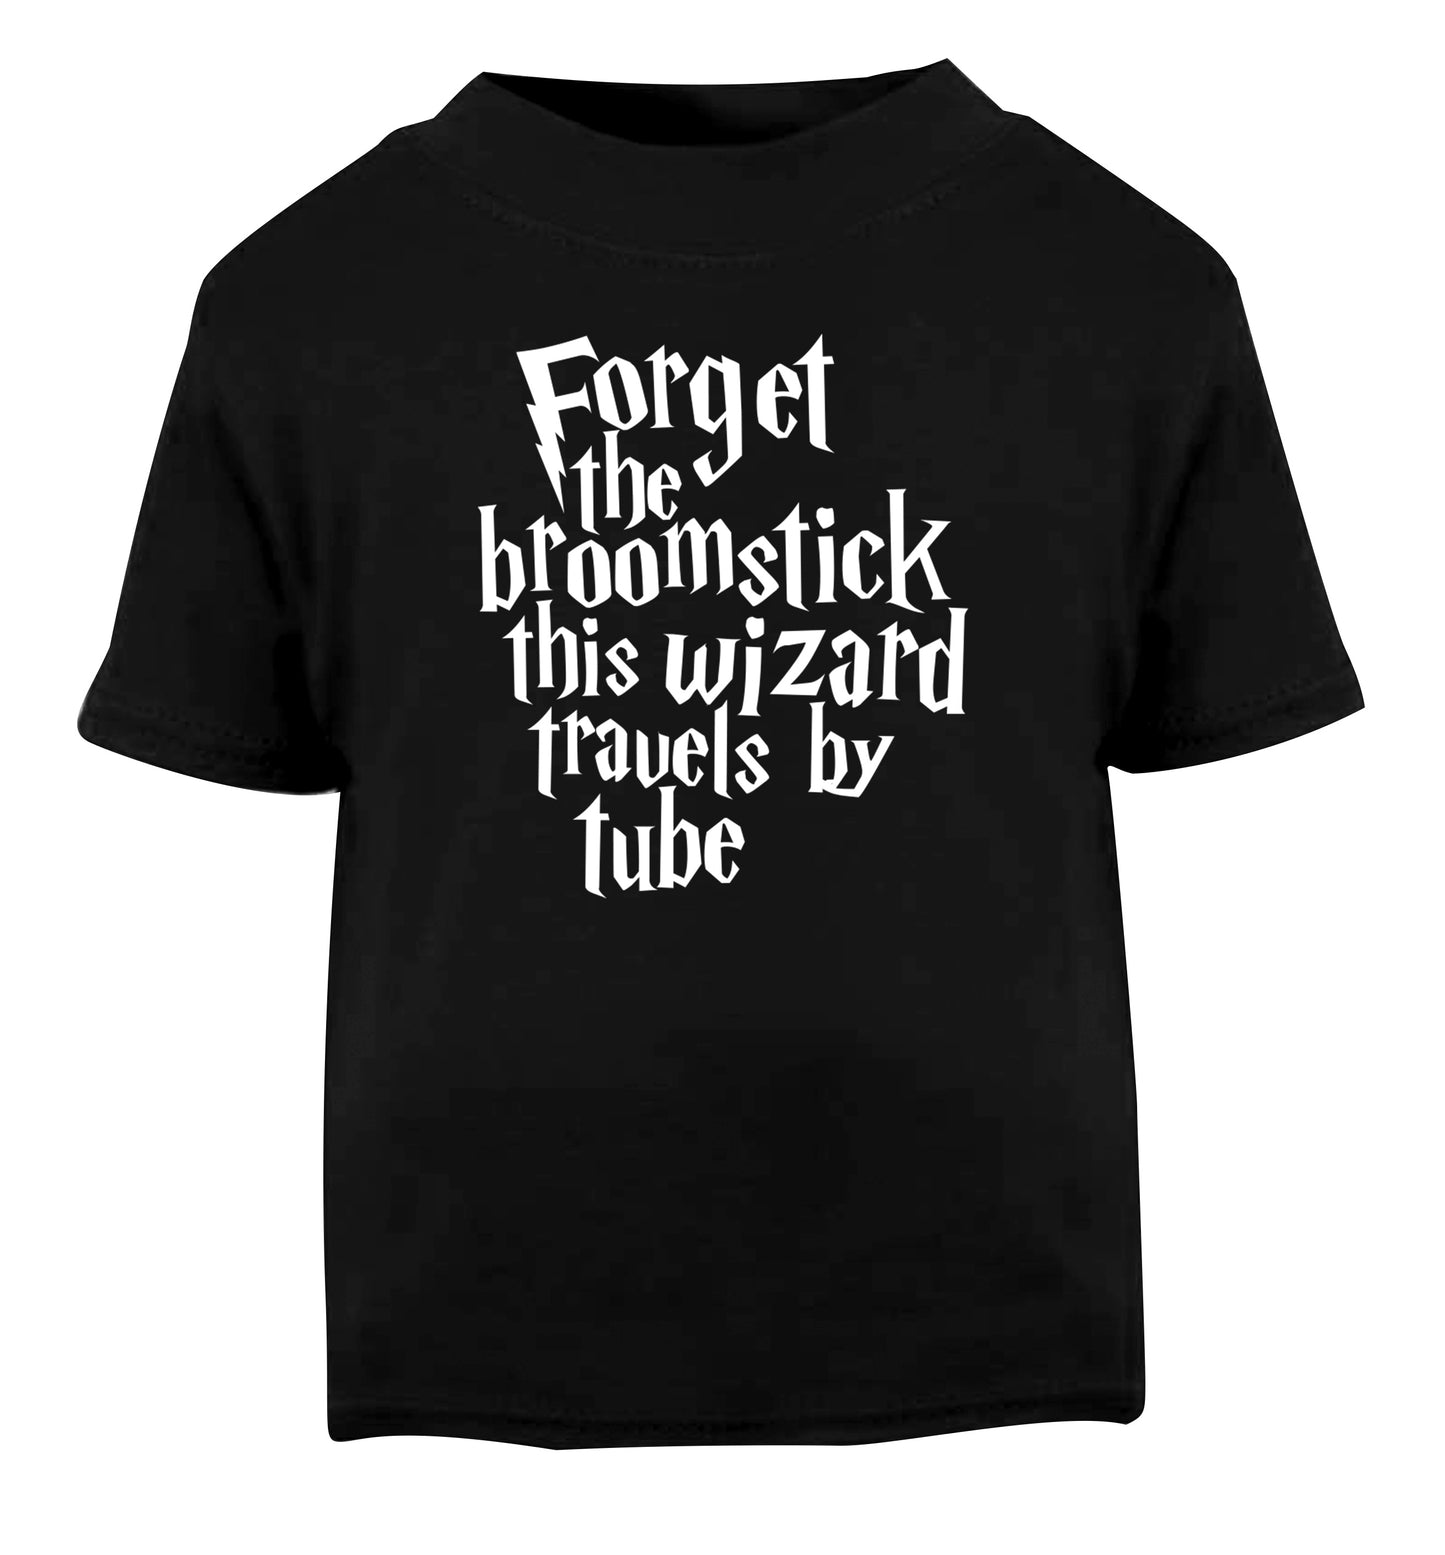 Forget the broomstick this wizard travels by tube Black Baby Toddler Tshirt 2 years